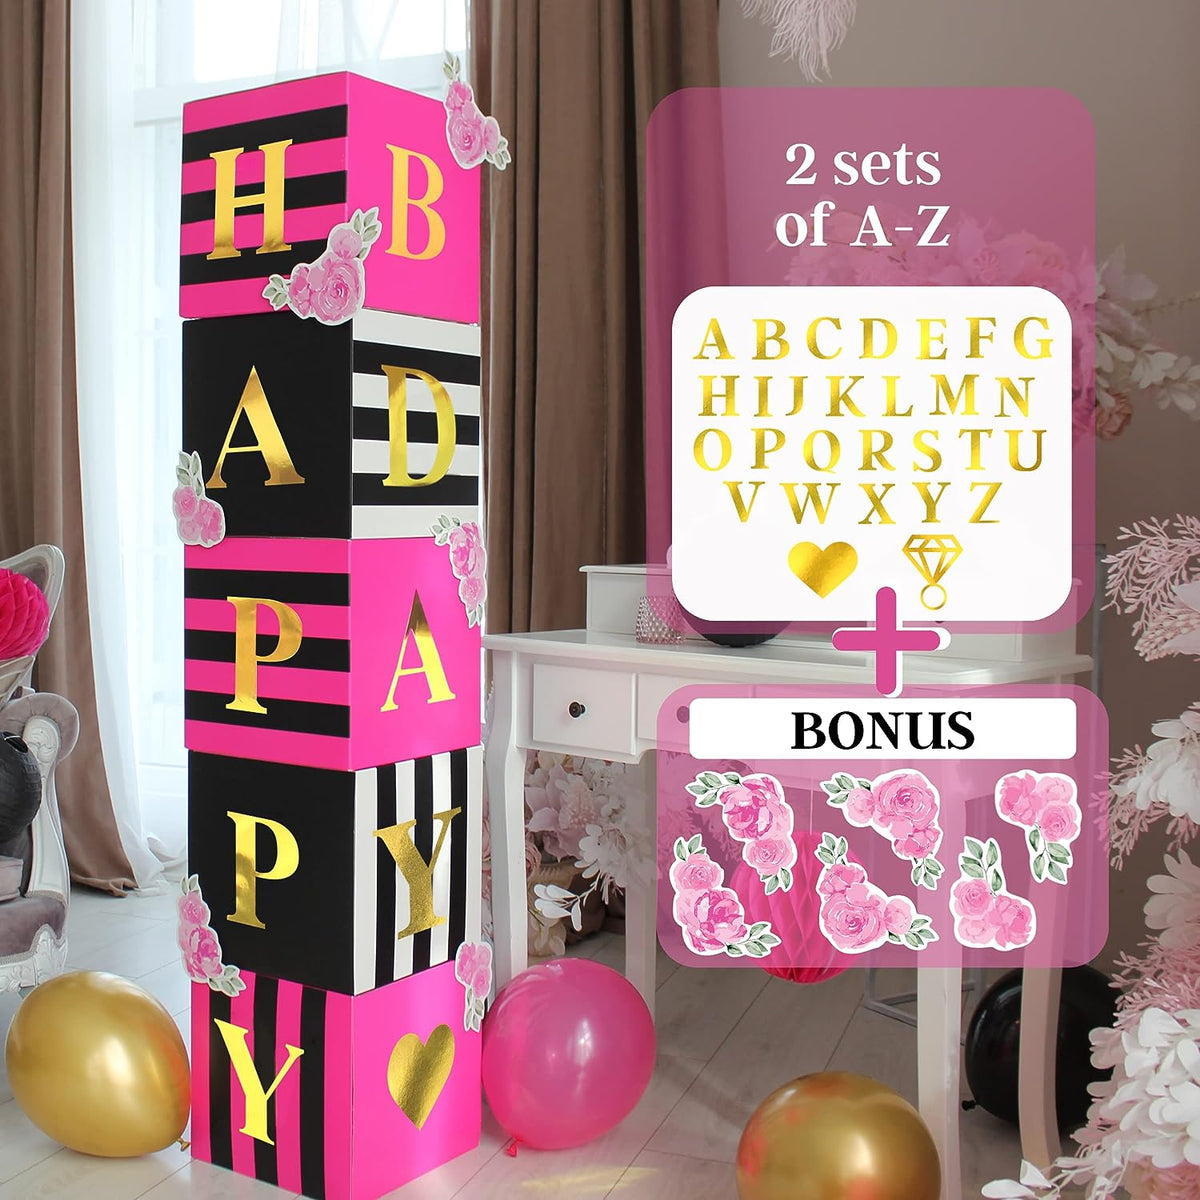 Hot Pink Balloon Boxes | Black and Pink Decorations for Birthday.